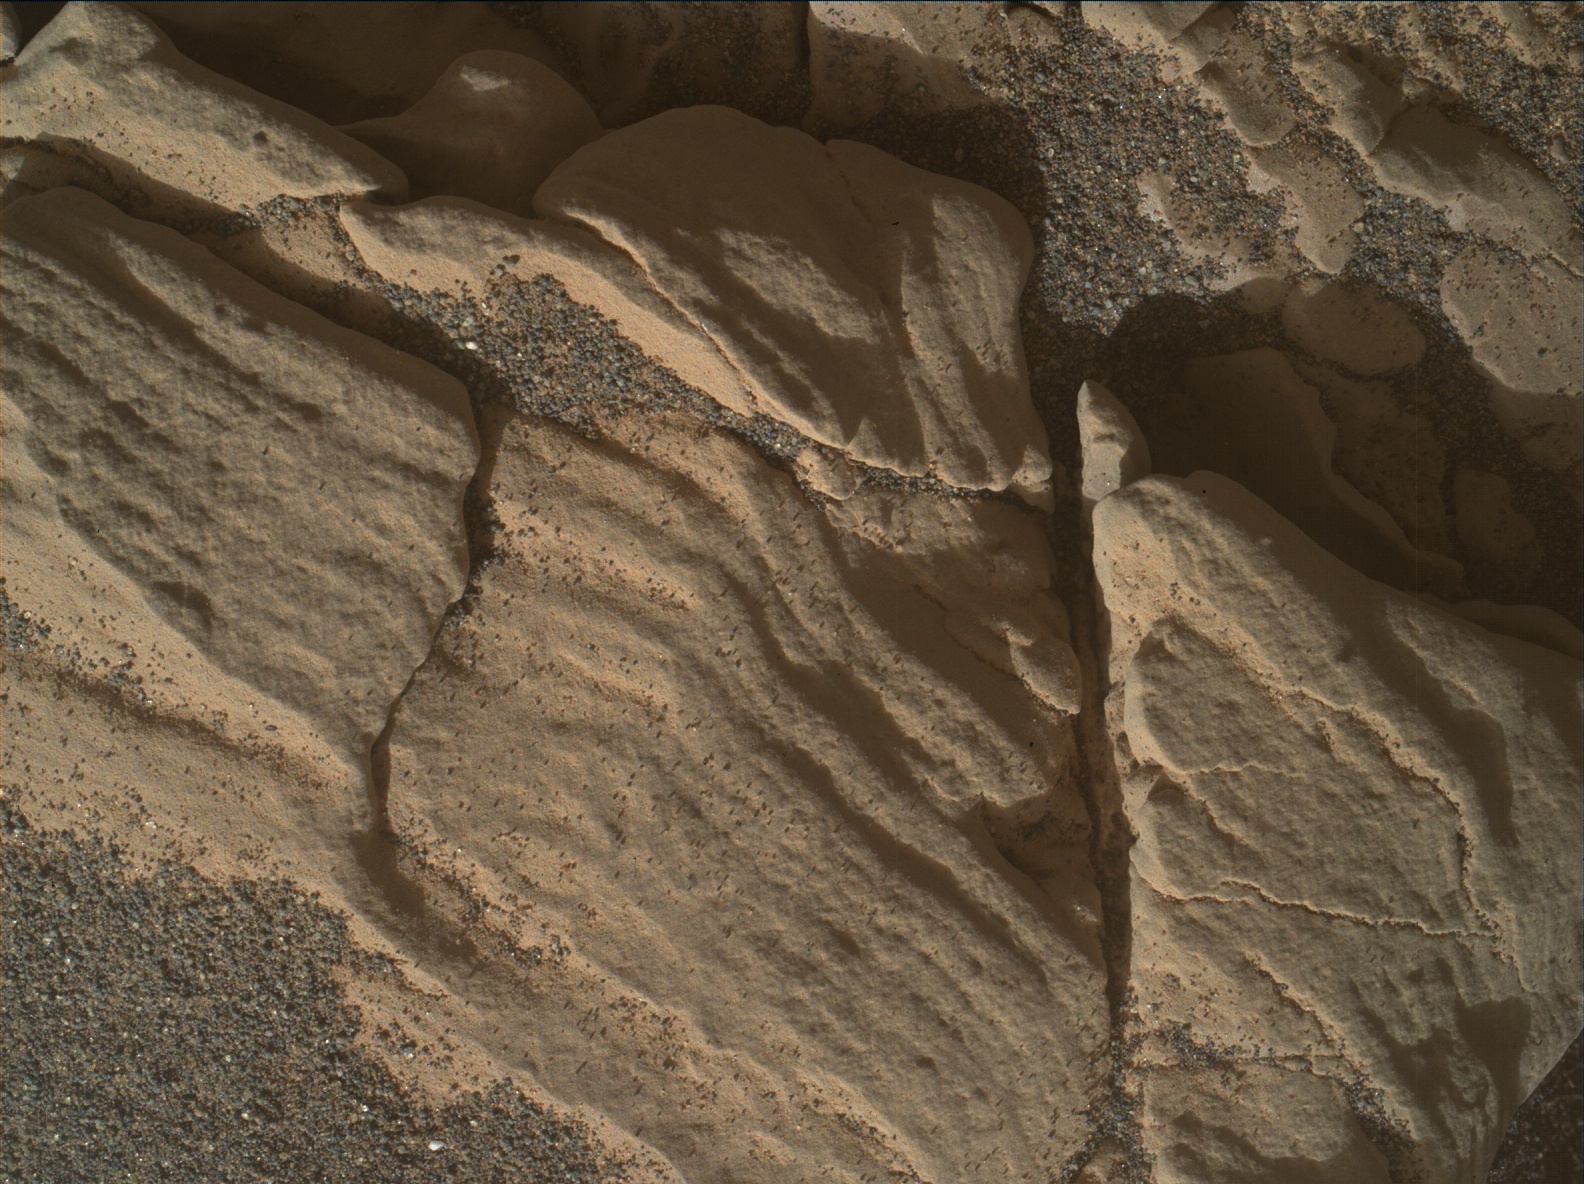 Nasa's Mars rover Curiosity acquired this image using its Mars Hand Lens Imager (MAHLI) on Sol 2925